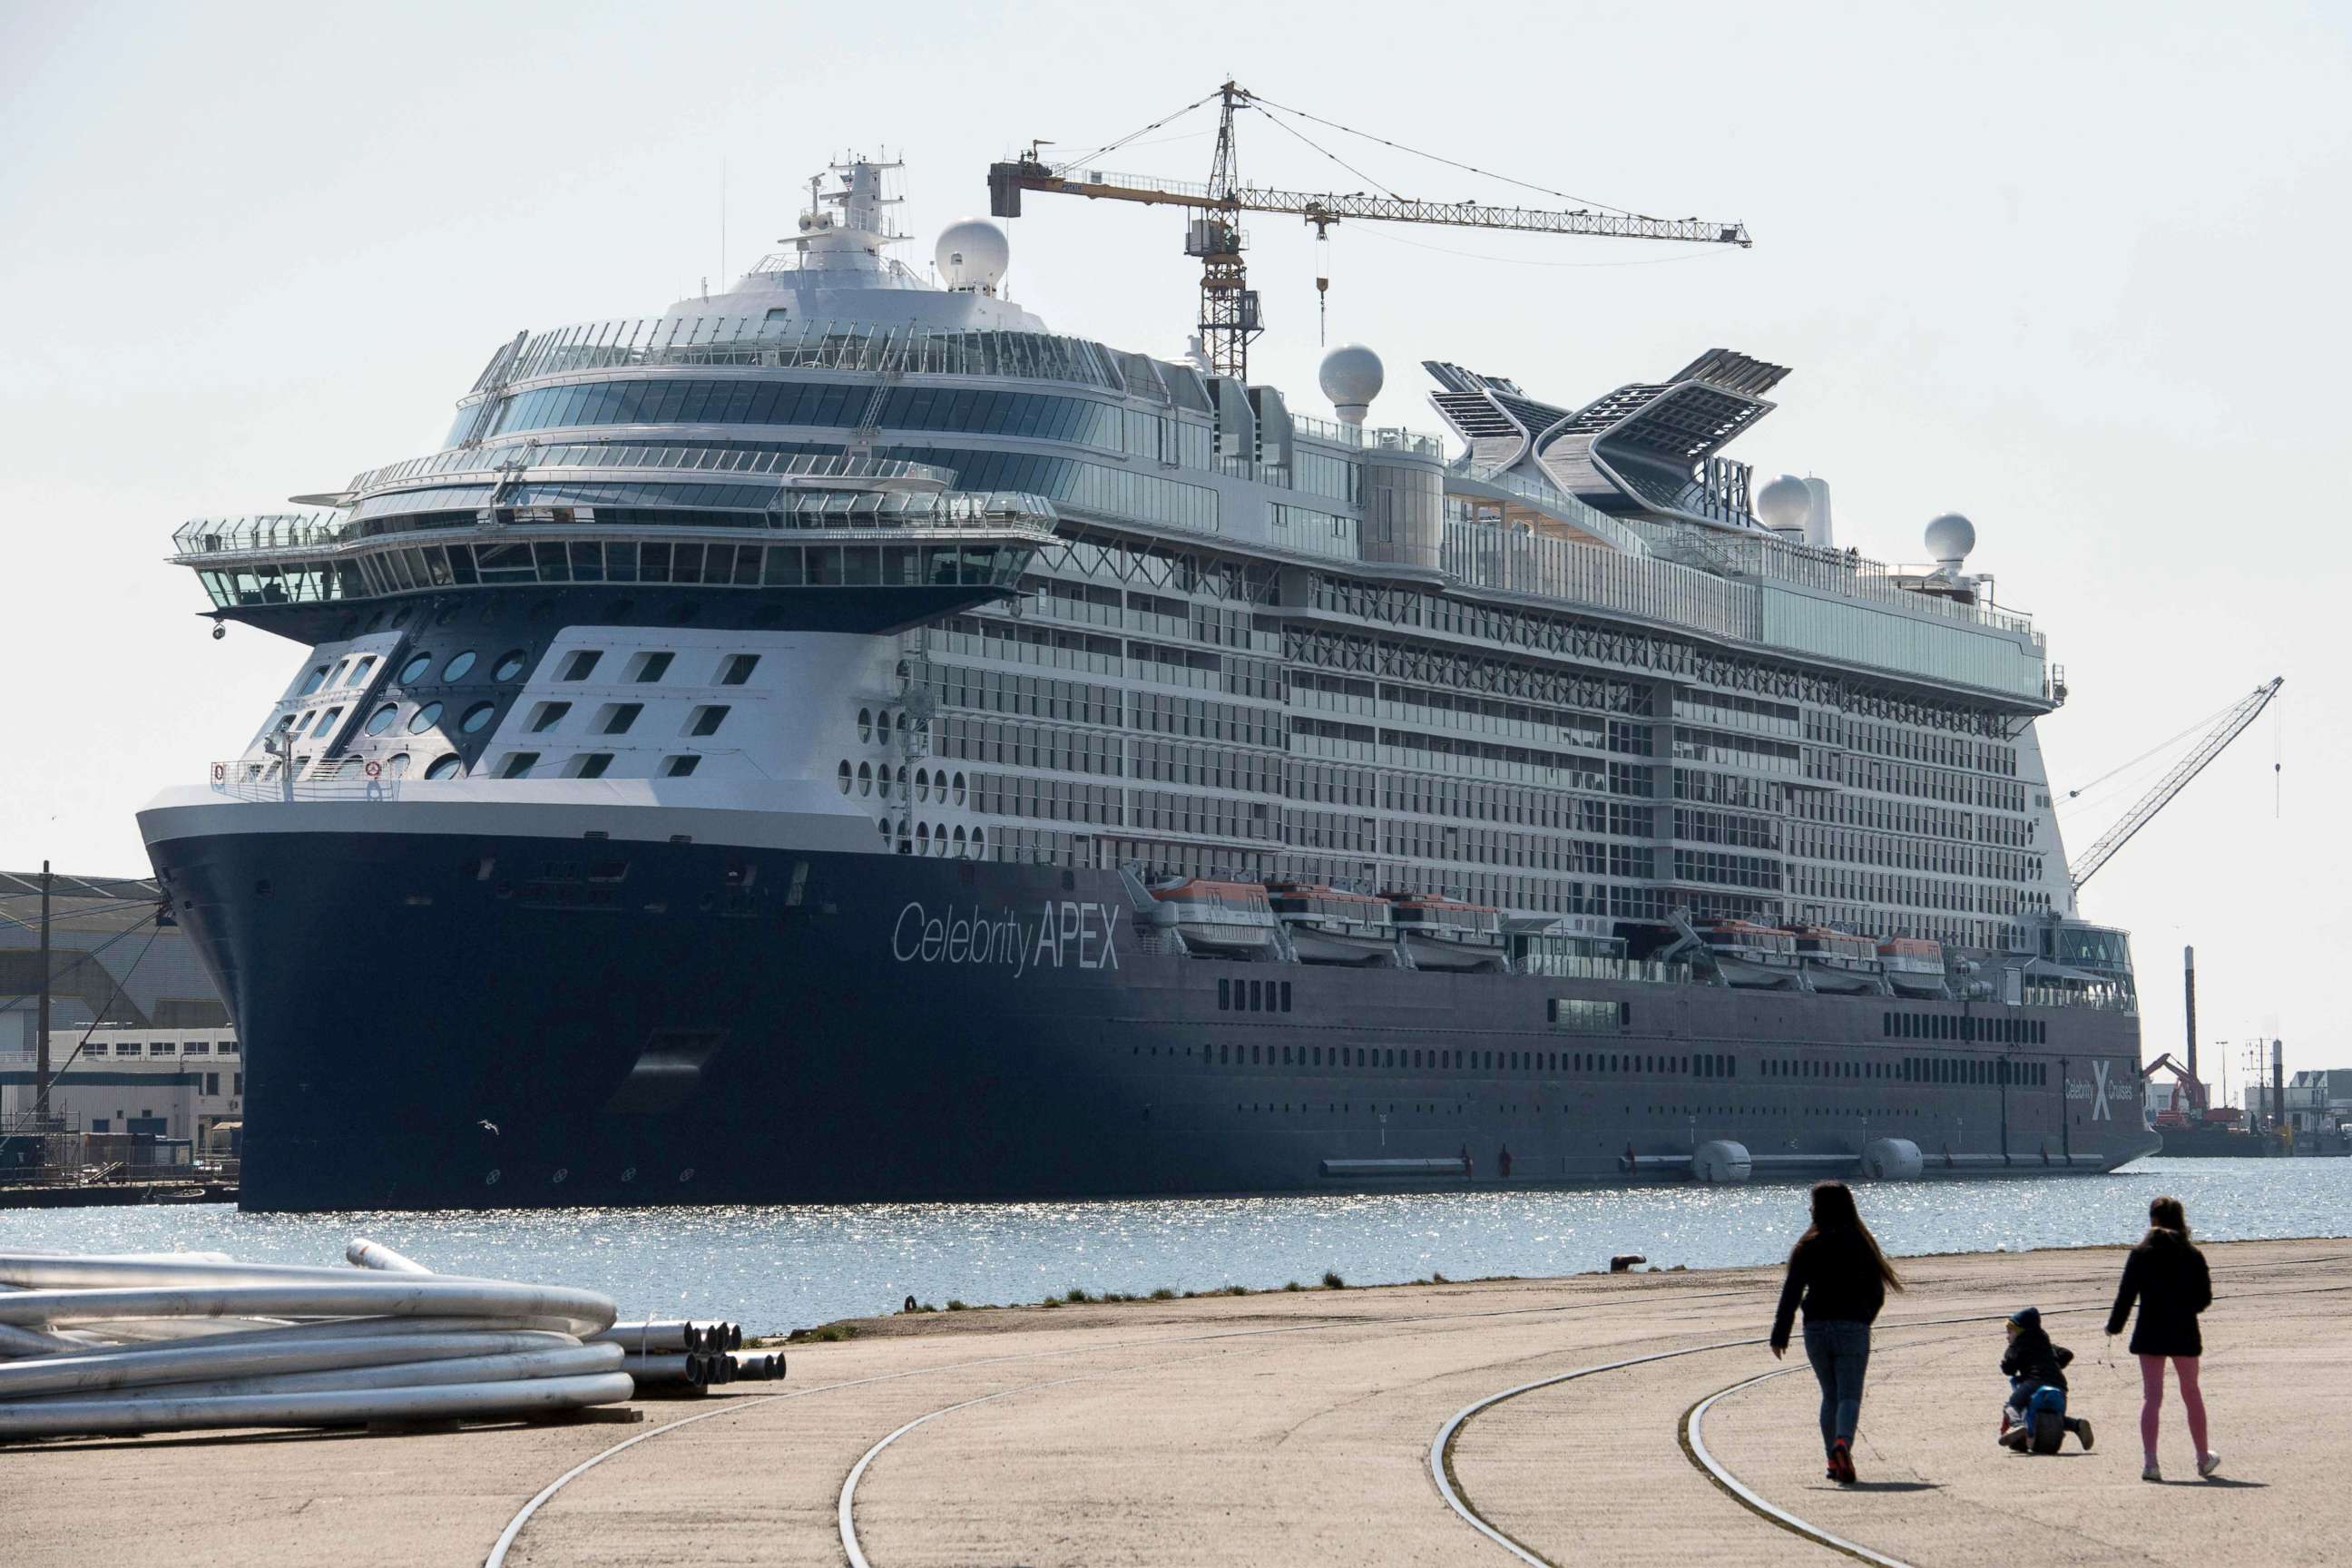 PHOTO: Children walk past the new Celebrity cruises ship "Celebrity Apex" at Les Chantiers de l'Atlantique shipyards, in Saint-Nazaire, France, April 2, 2020, on the seventeenth day of a strict lockdown in France to stop the spread of COVID-19.